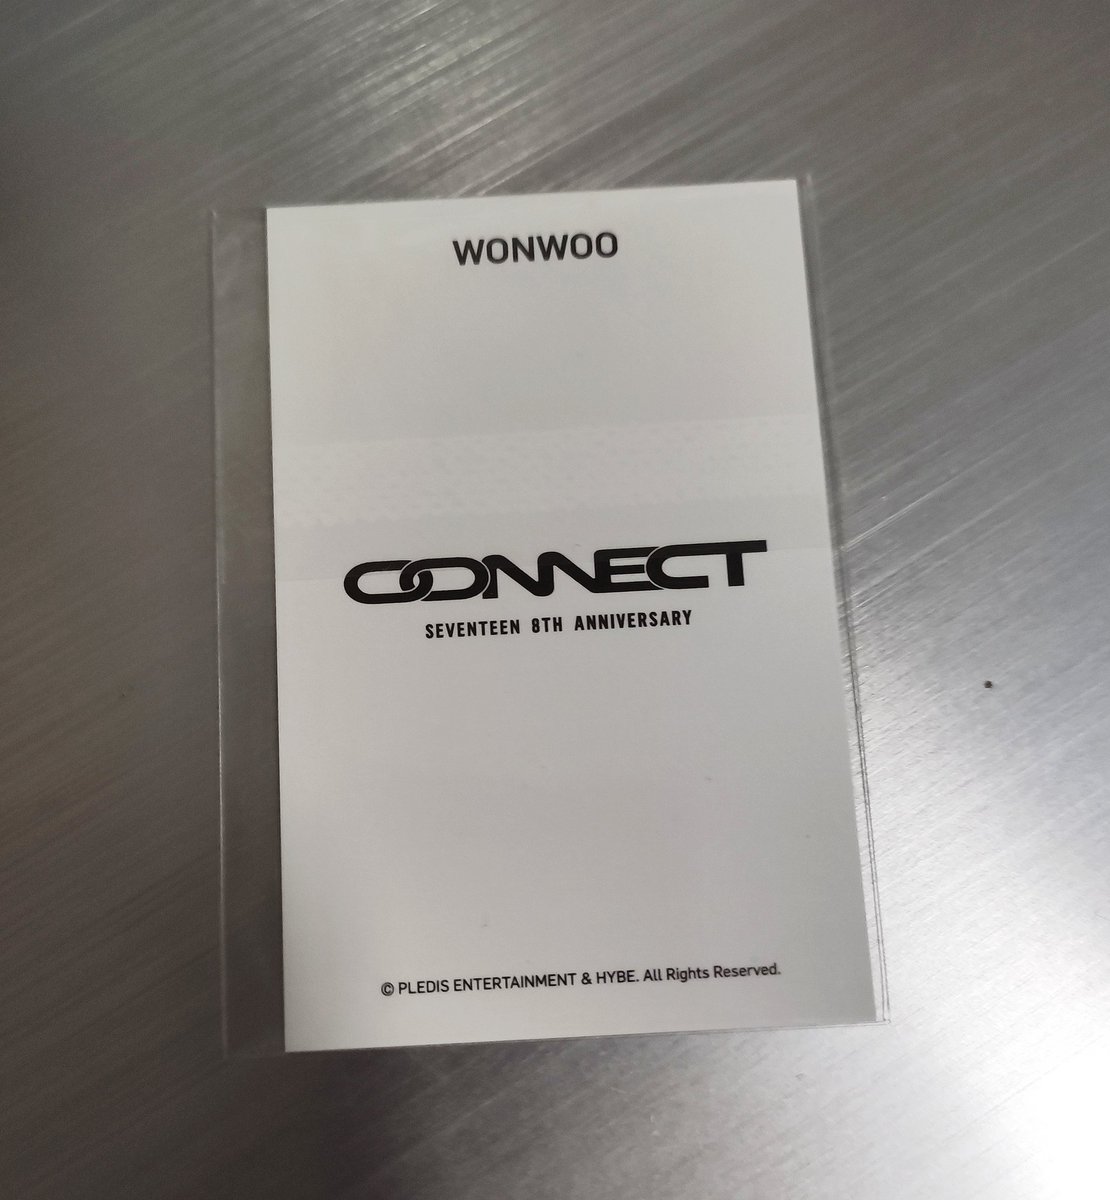 wts lfb ww #F2CartPhOnhand

Connect SVT 8th Anniversary Wonwoo Earrings Photocard

• P550
• PAYO | DOP on 11/30
• gcash/maya/spay/paypal
• can ship immediately

RFS: Not a collector

comment or dm me 🫰

seventeen carat bns